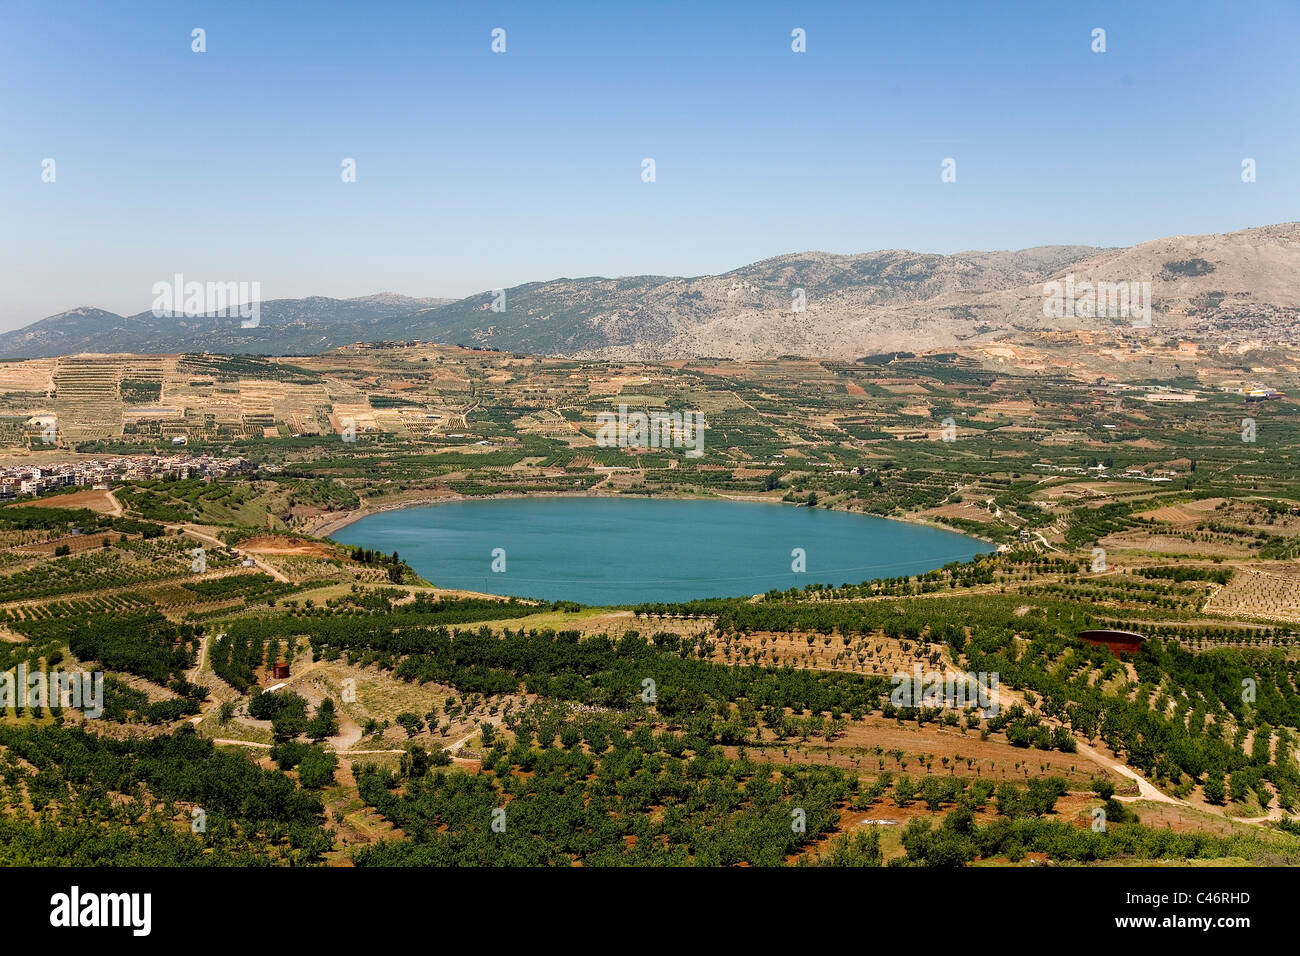 Aerial photograph of Ram's pool in the northern Golan Heights Stock Photo